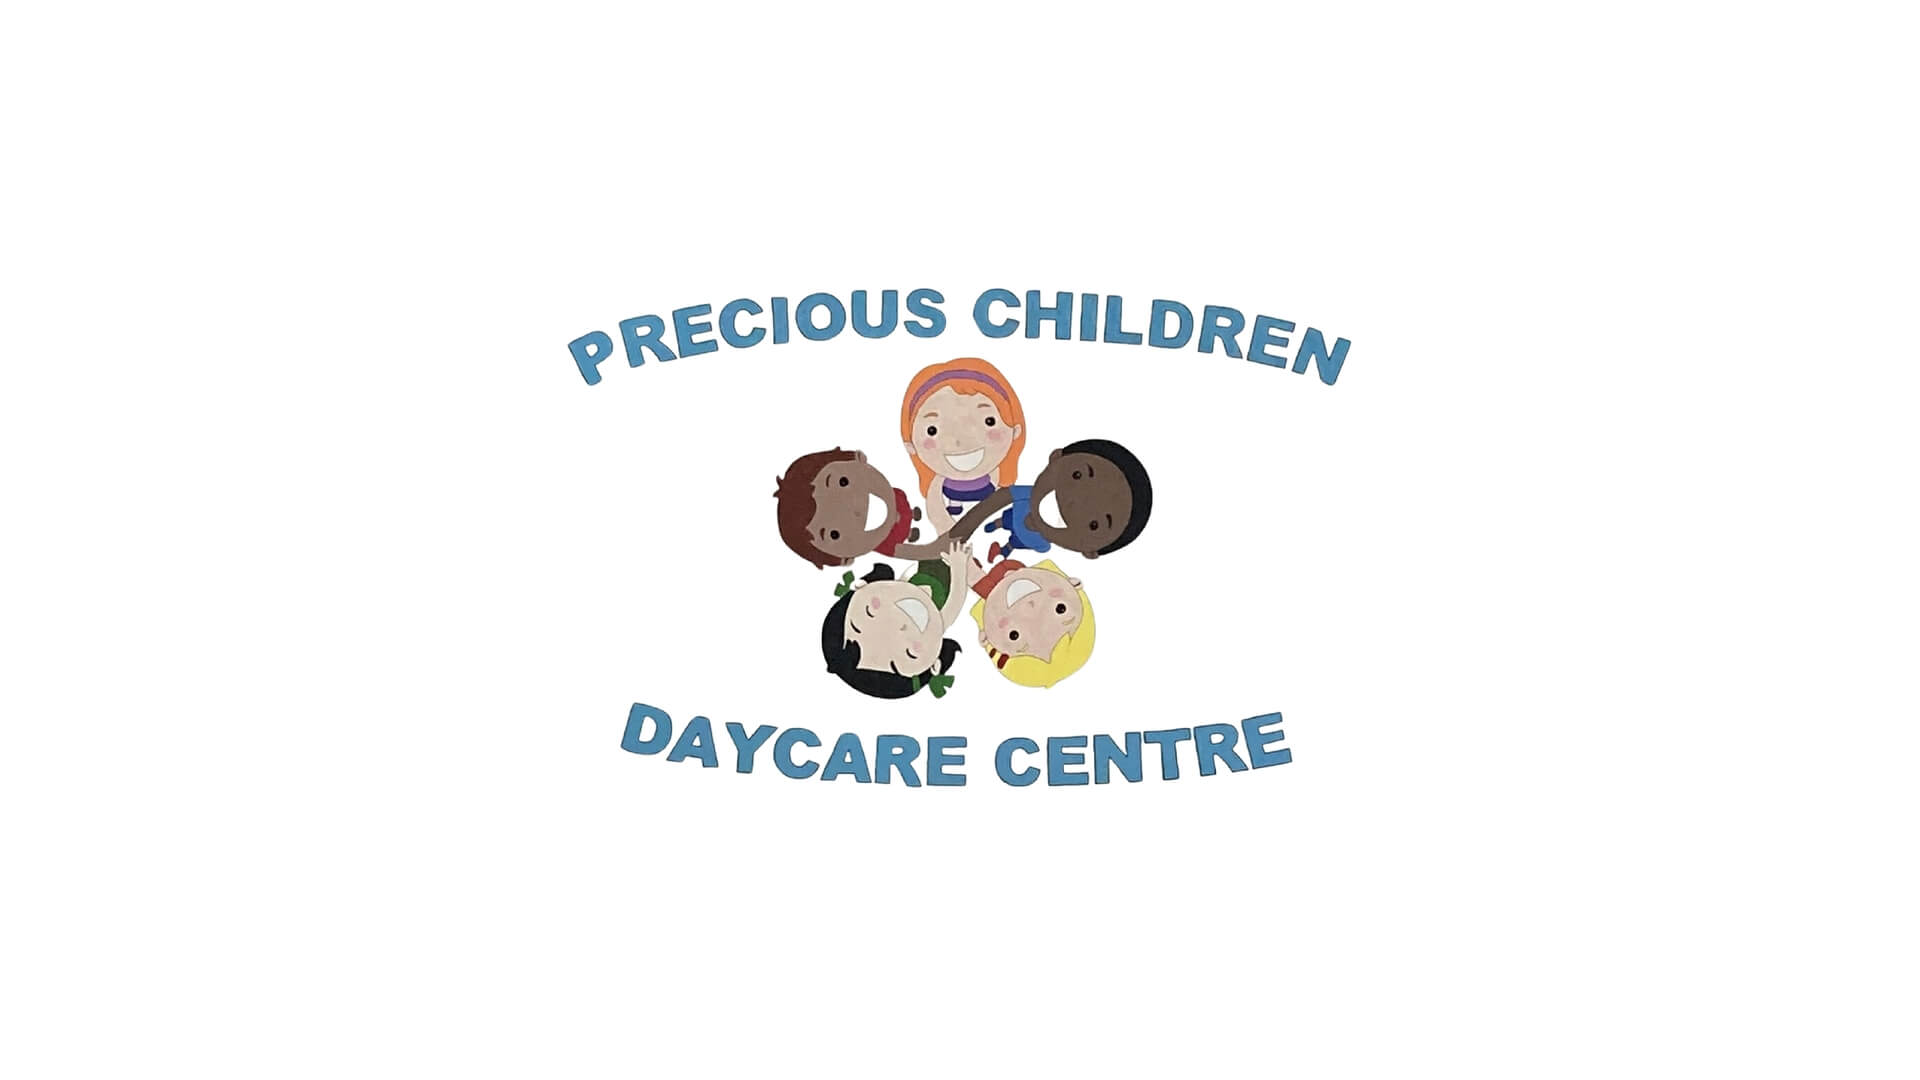 Timmins Care Logo of precious children daycare centre featuring a joyful caregiver surrounded by four diverse children, with text in a circular arrangement. Cochrane District Social Services Administration Board